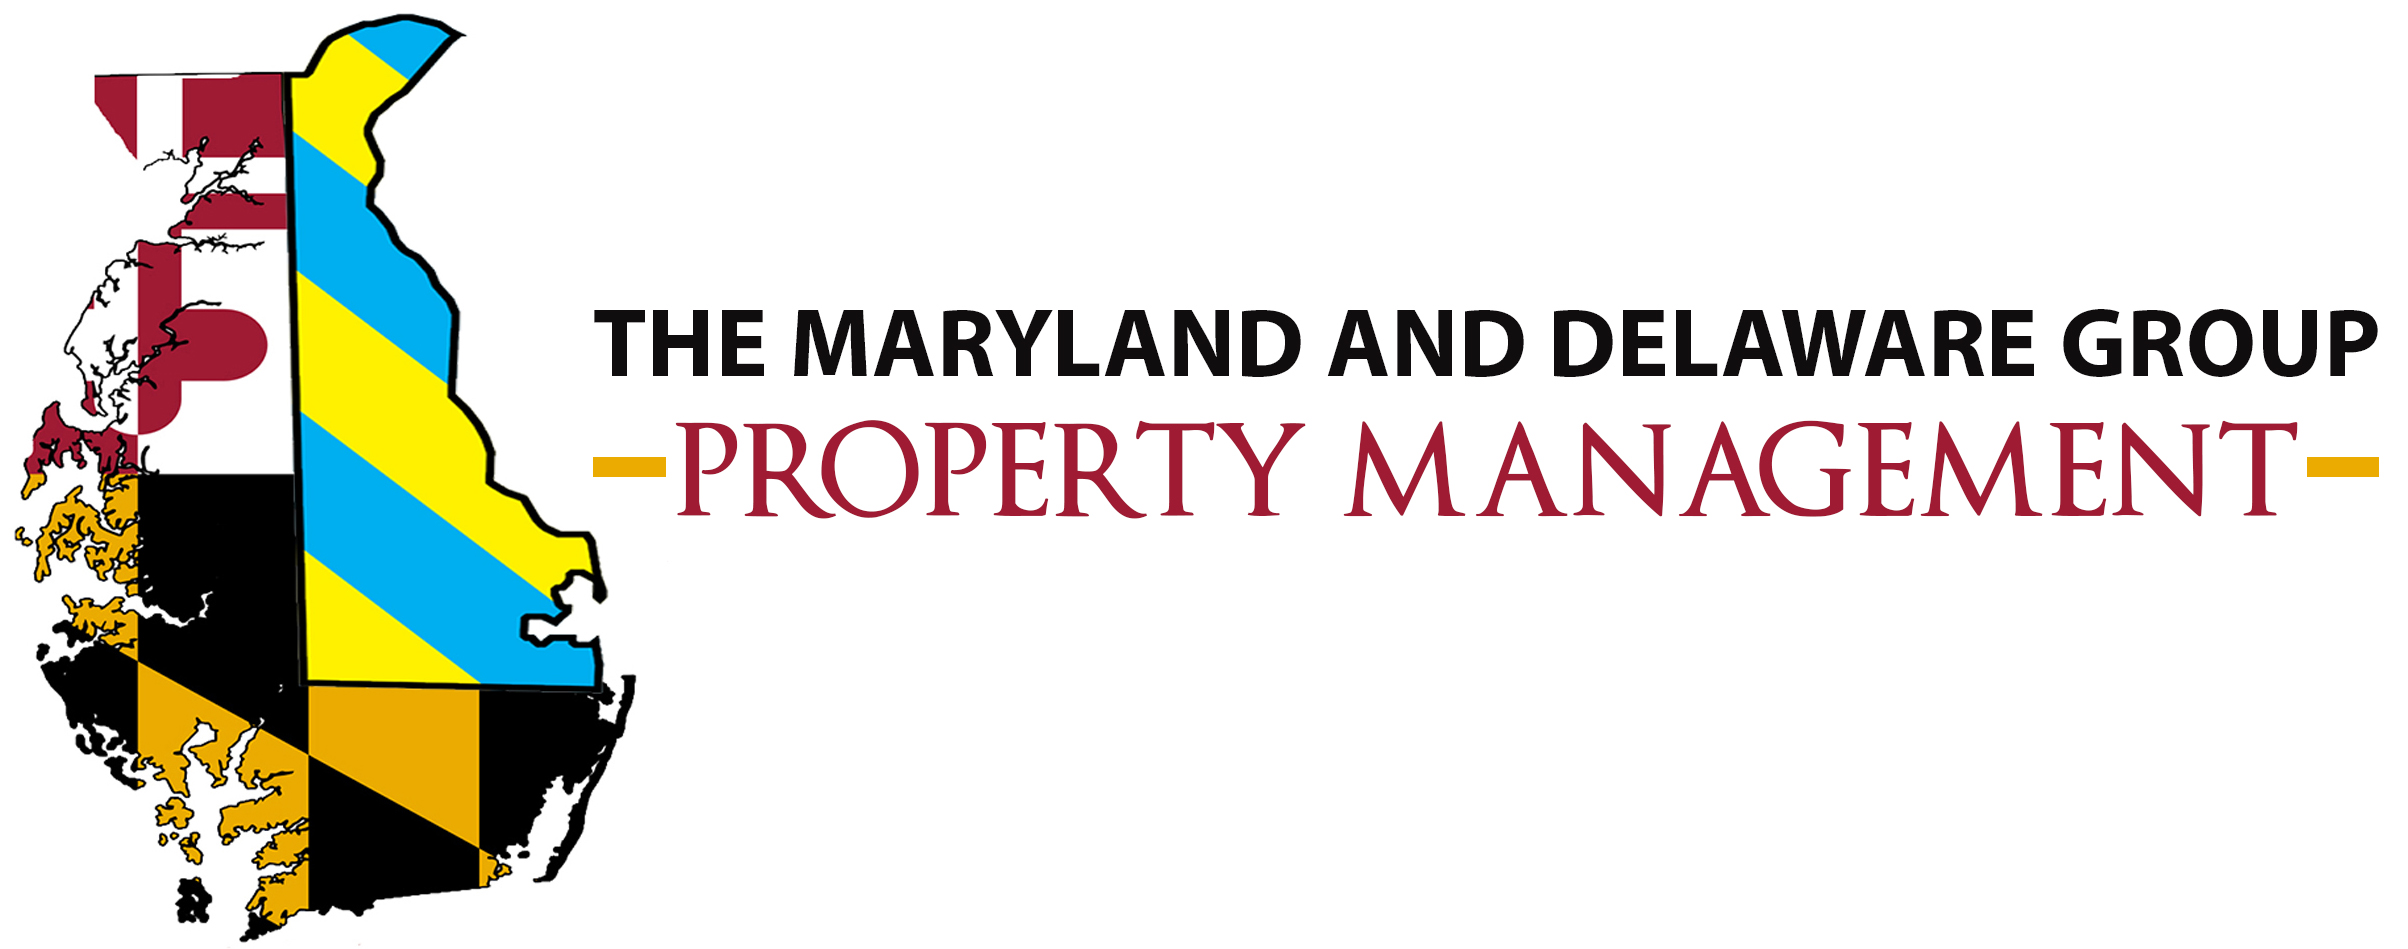 The Maryland and Delaware Group Property Management